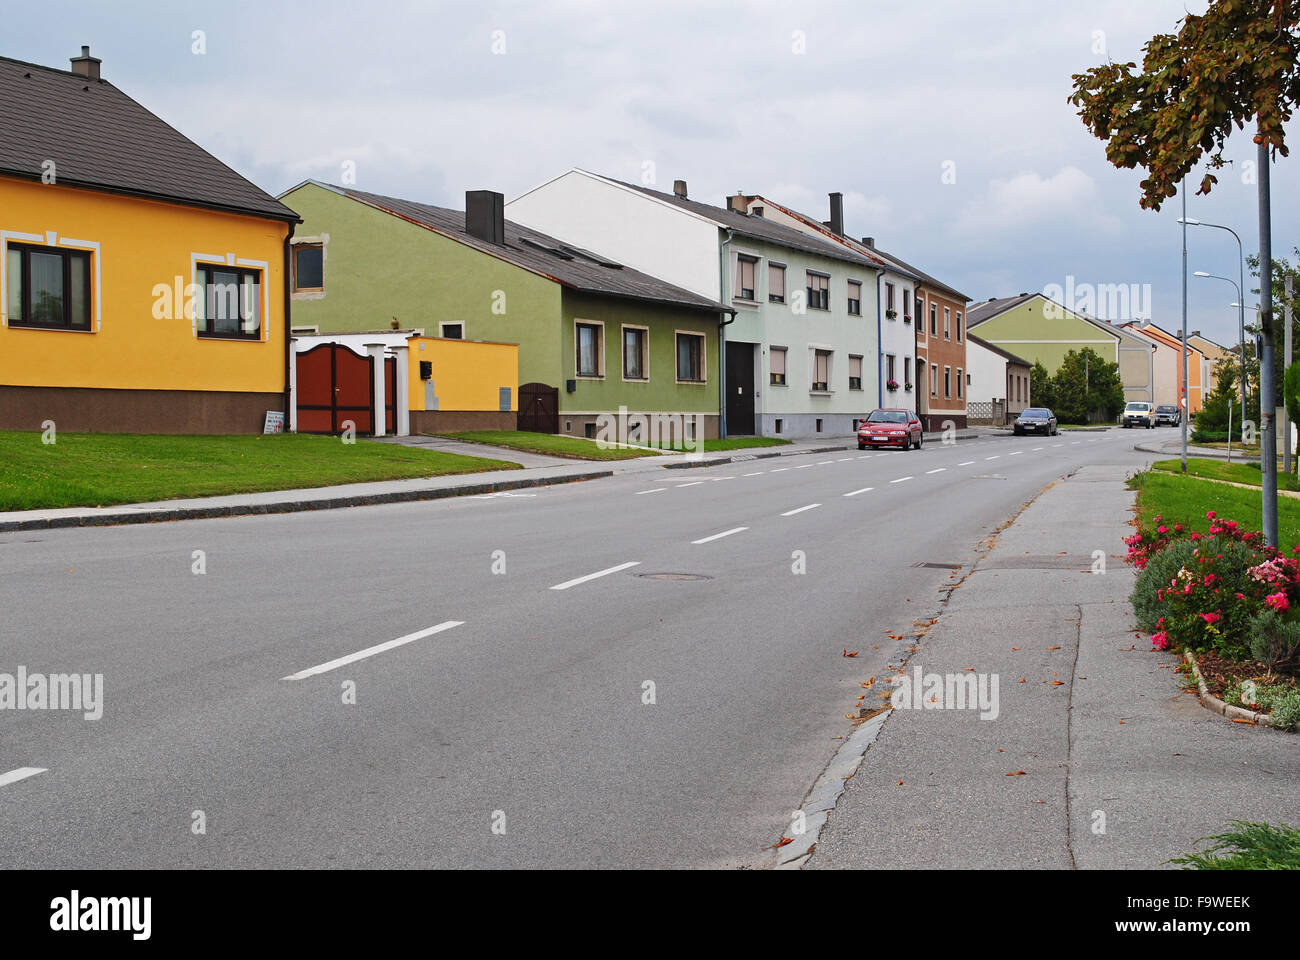 Austrian street scene with a wide road and modern, colourful houses in a small village. Stock Photo